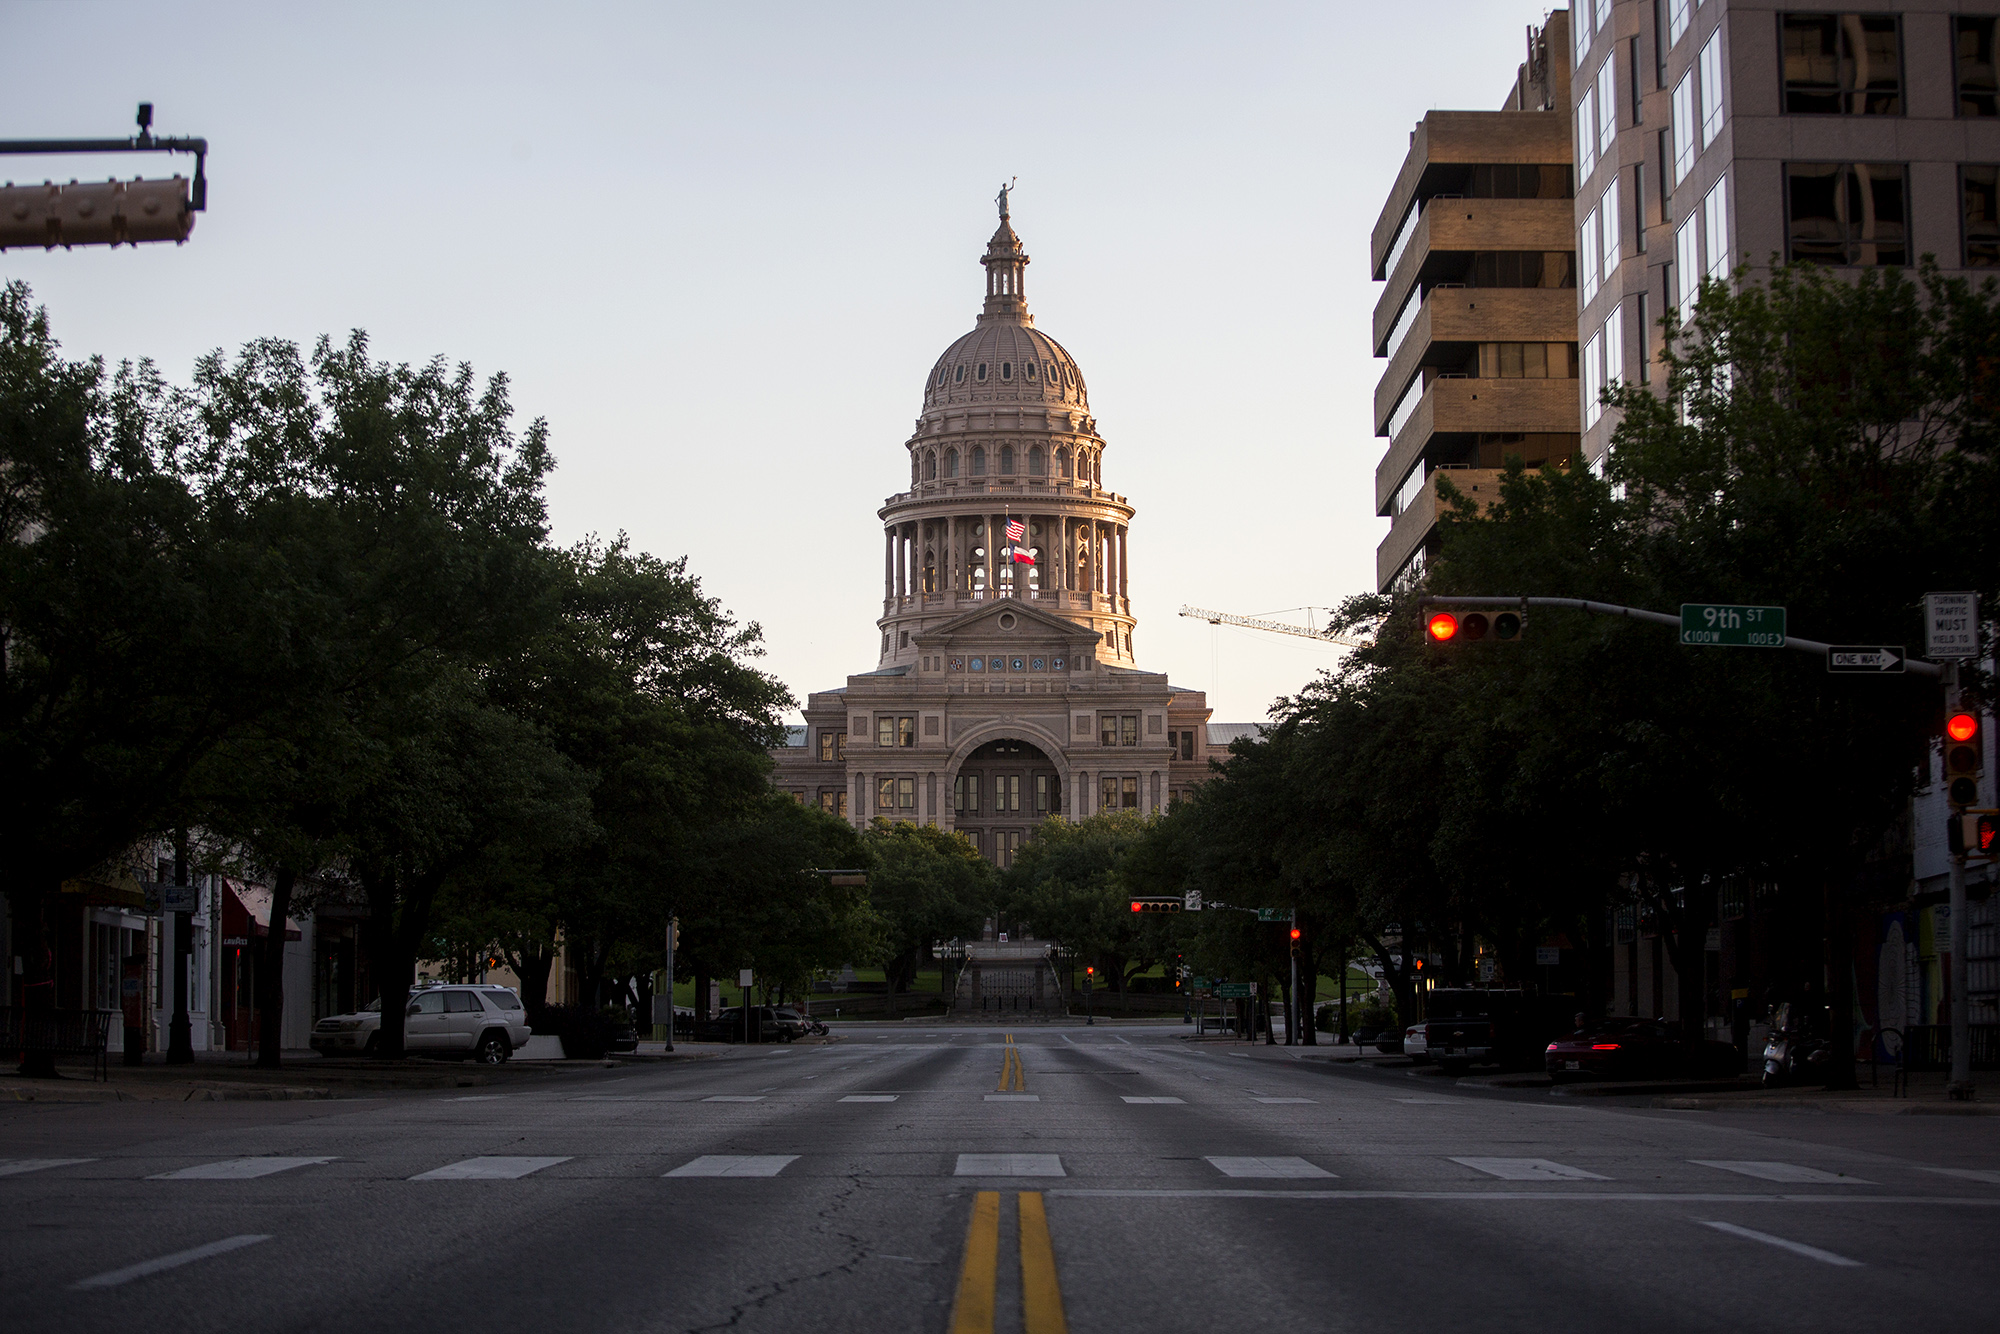 The Texas State Capitol stands in Austin, Texas.